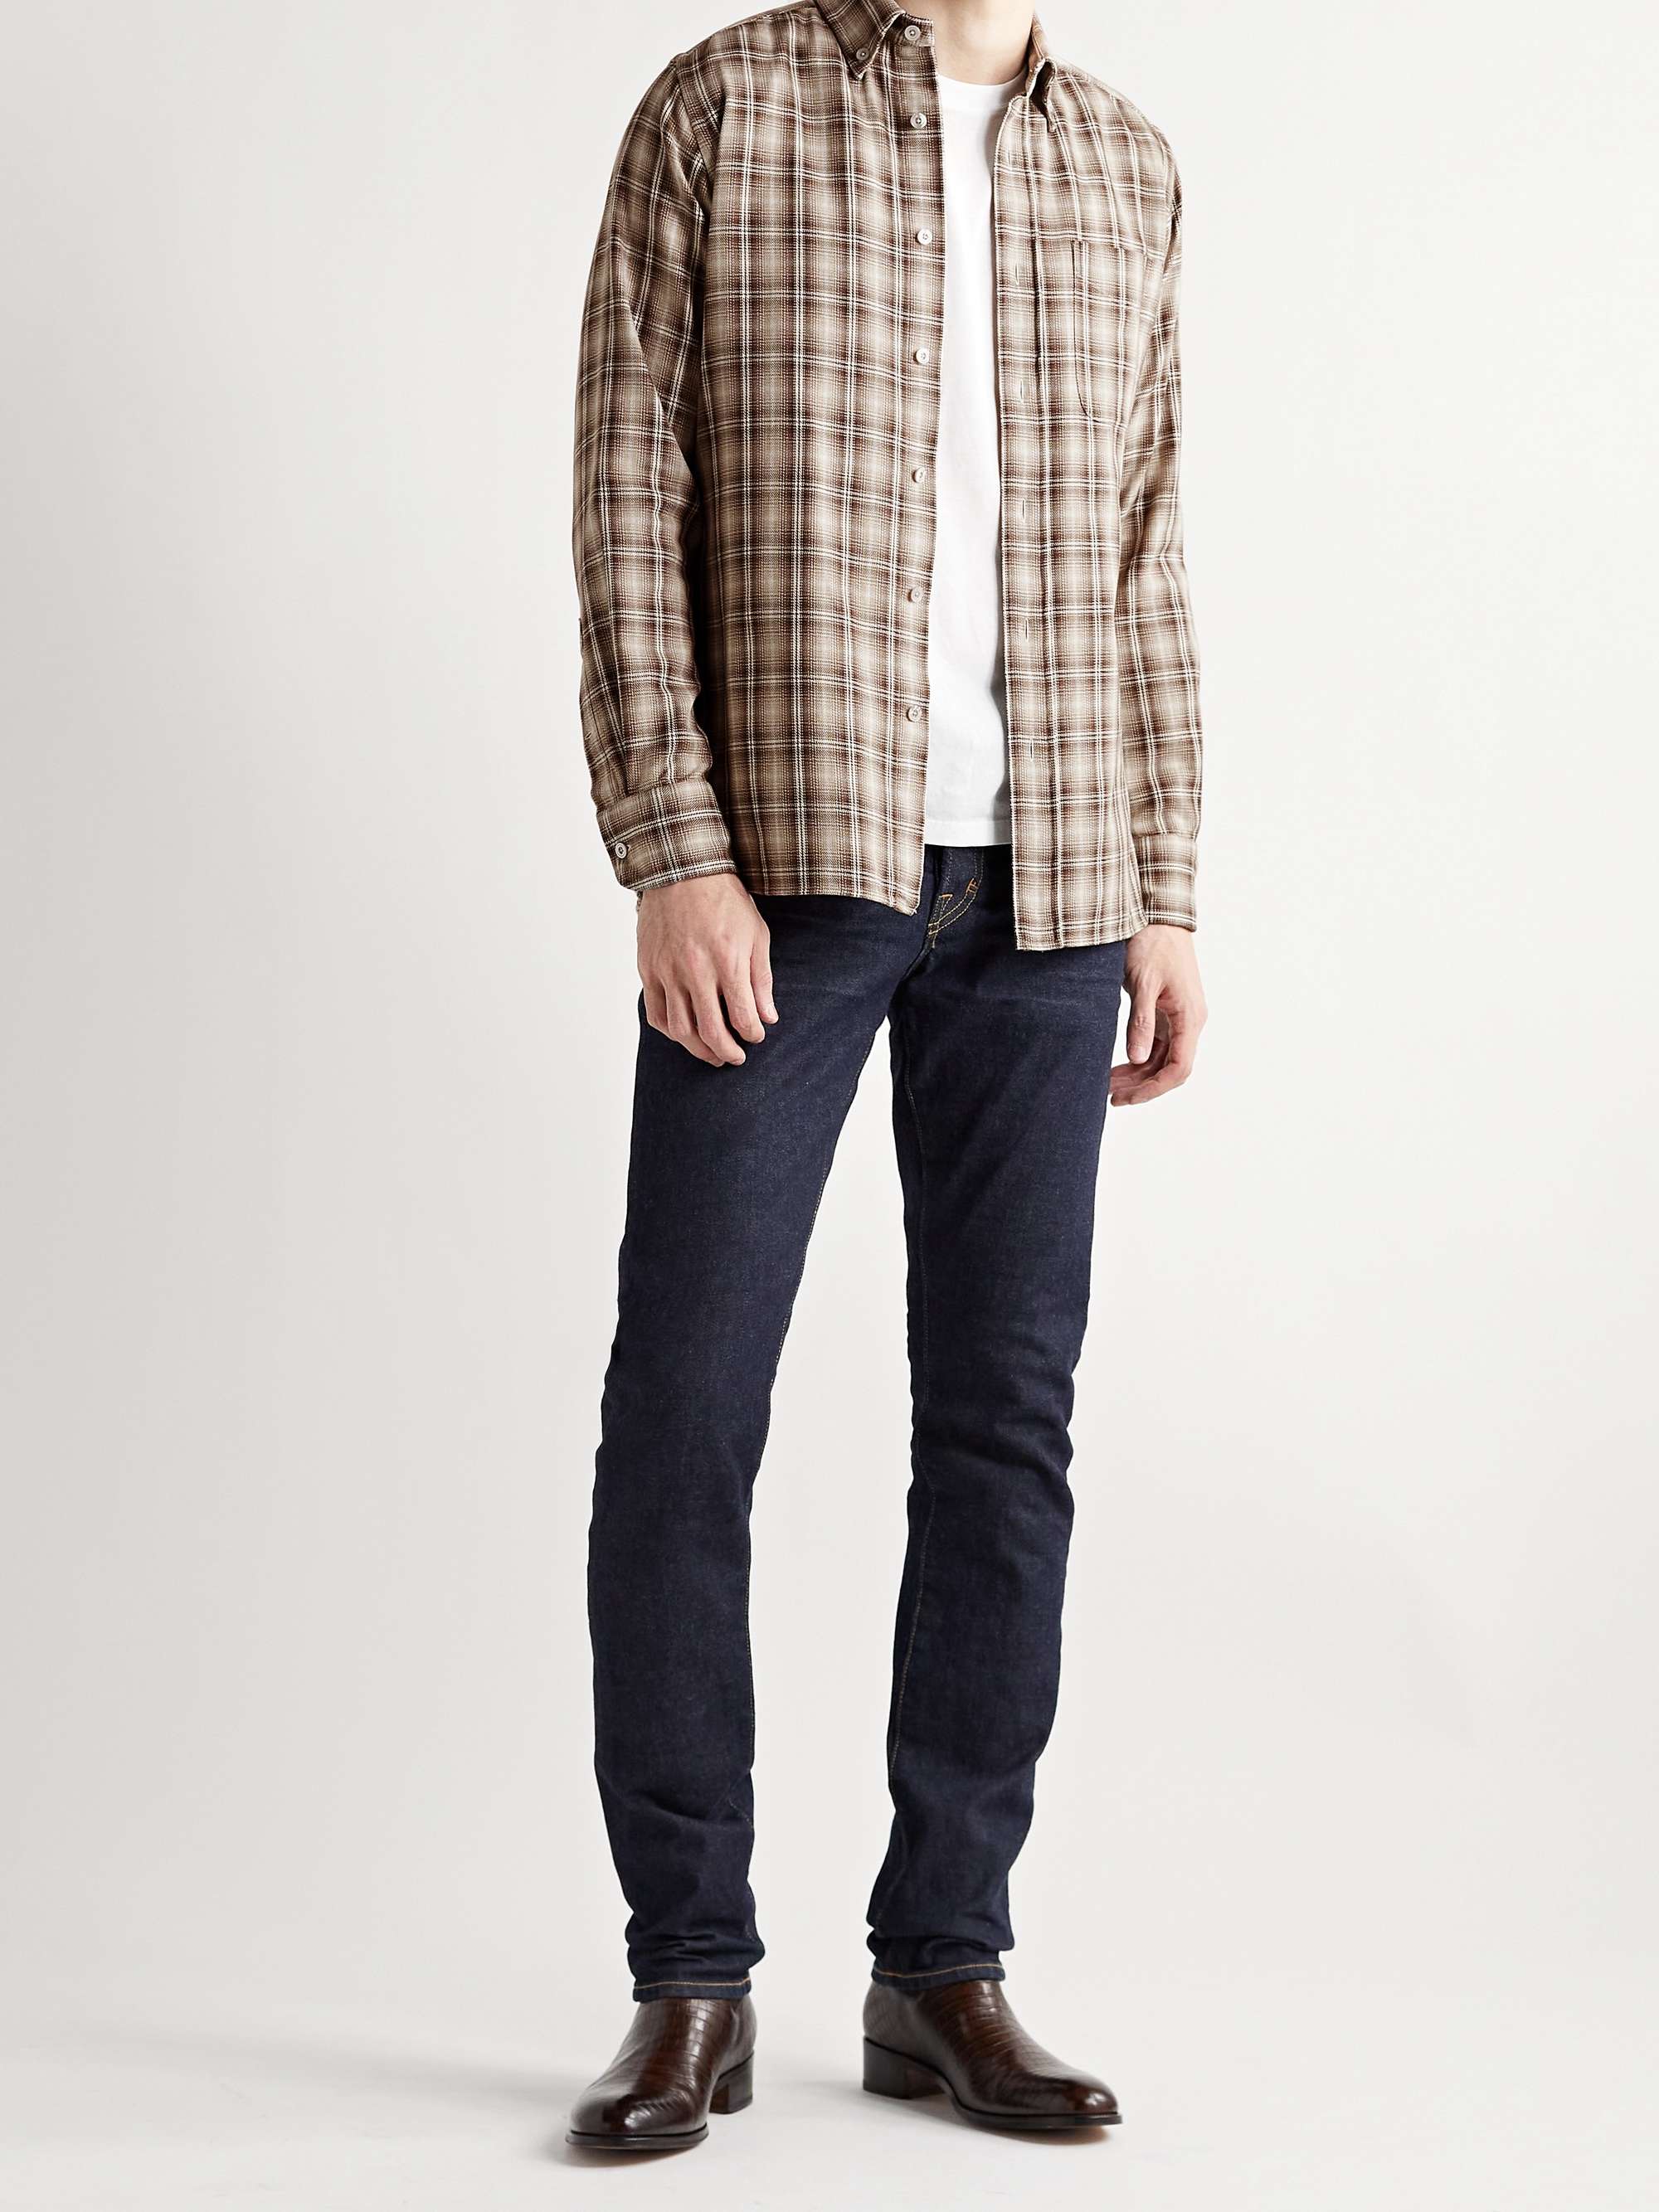 TOM FORD Slim-Fit Button-Down Collar Checked Cotton Shirt